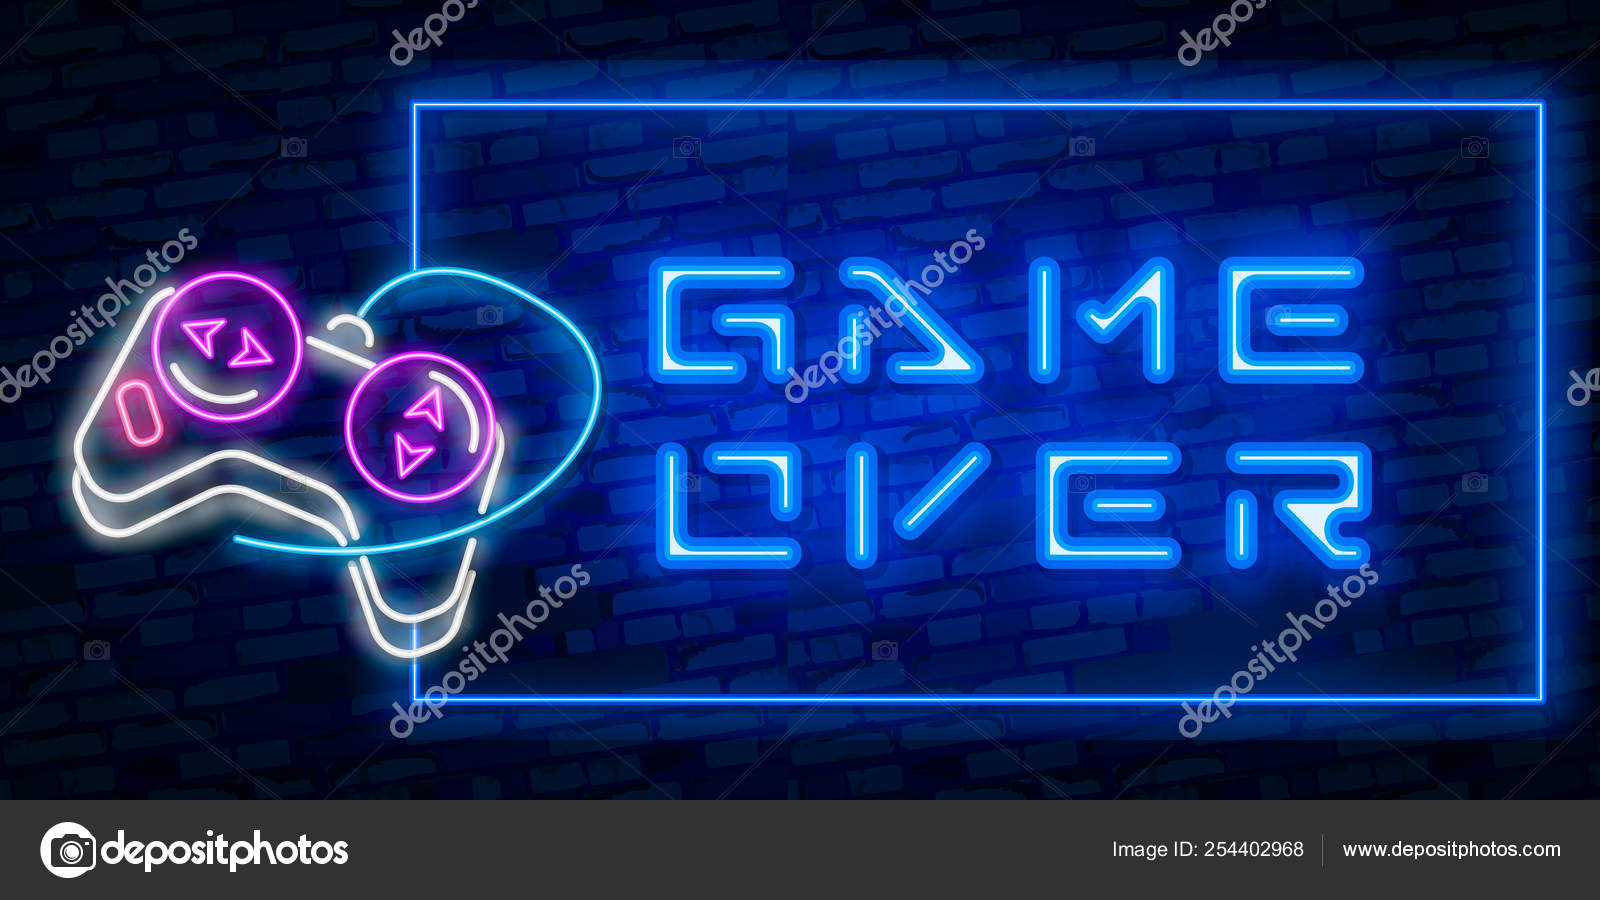 Neon sign with Cyber Monday text for decoration and covering on